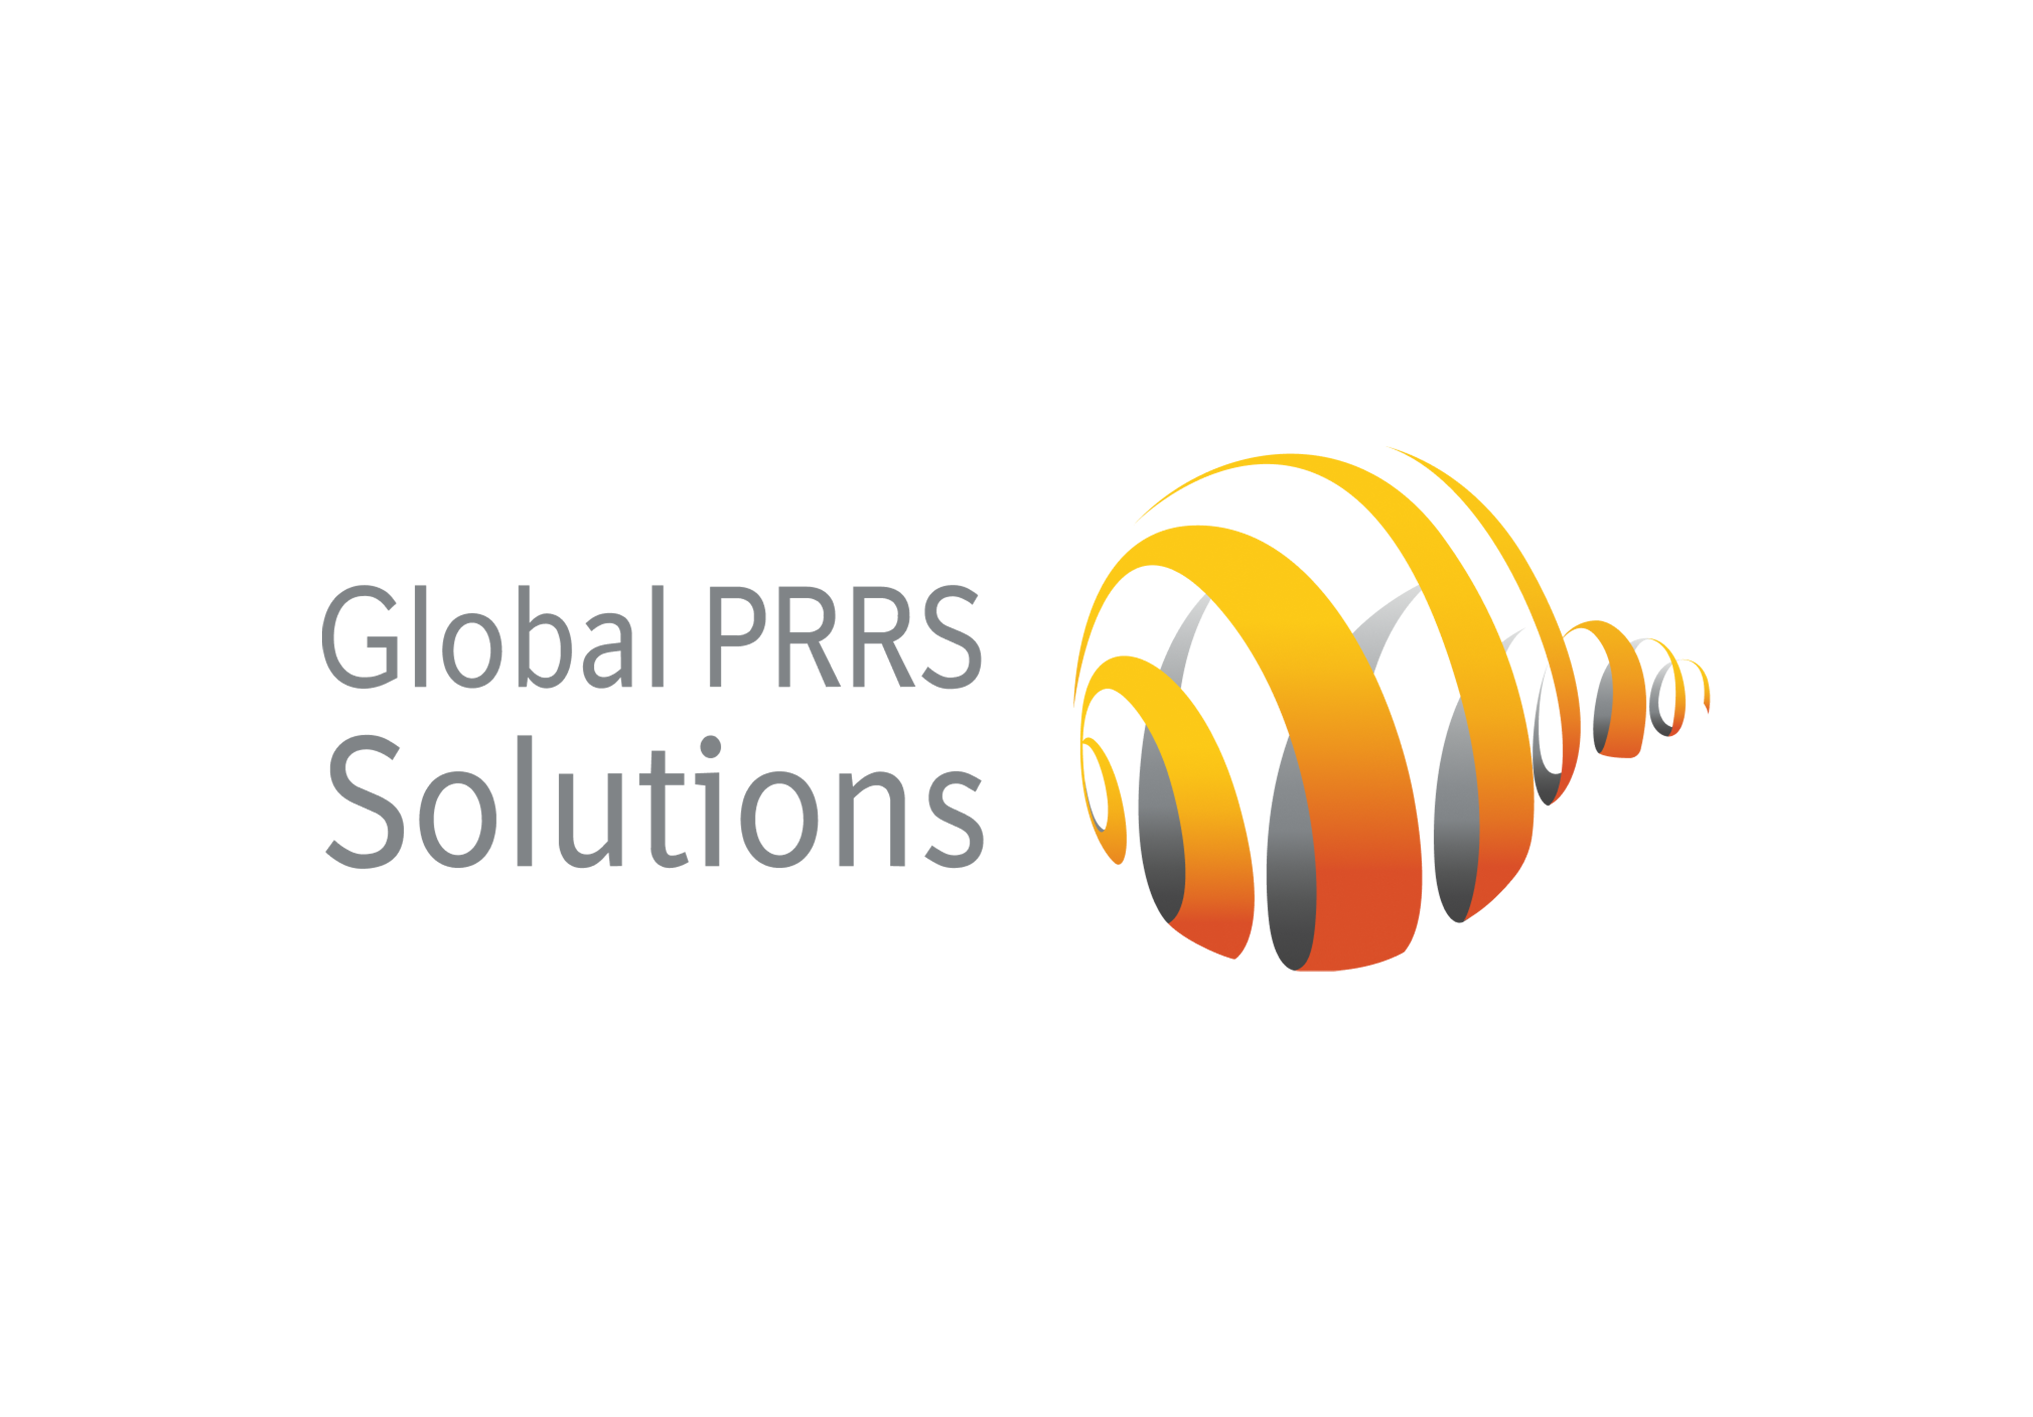 Global PRRS Solutions